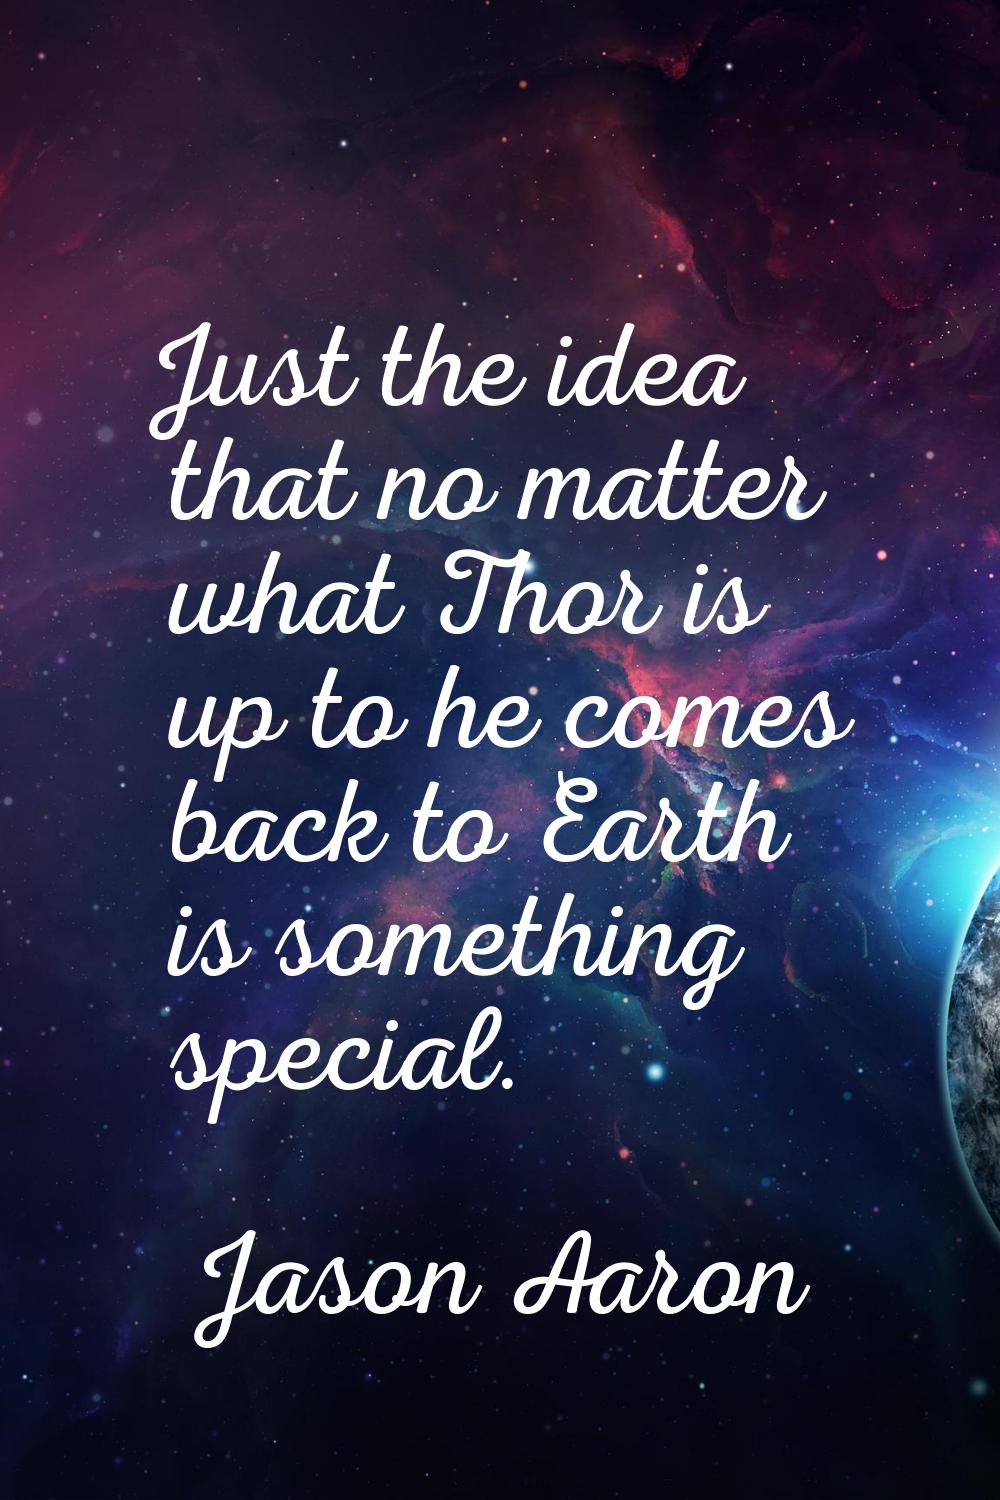 Just the idea that no matter what Thor is up to he comes back to Earth is something special.